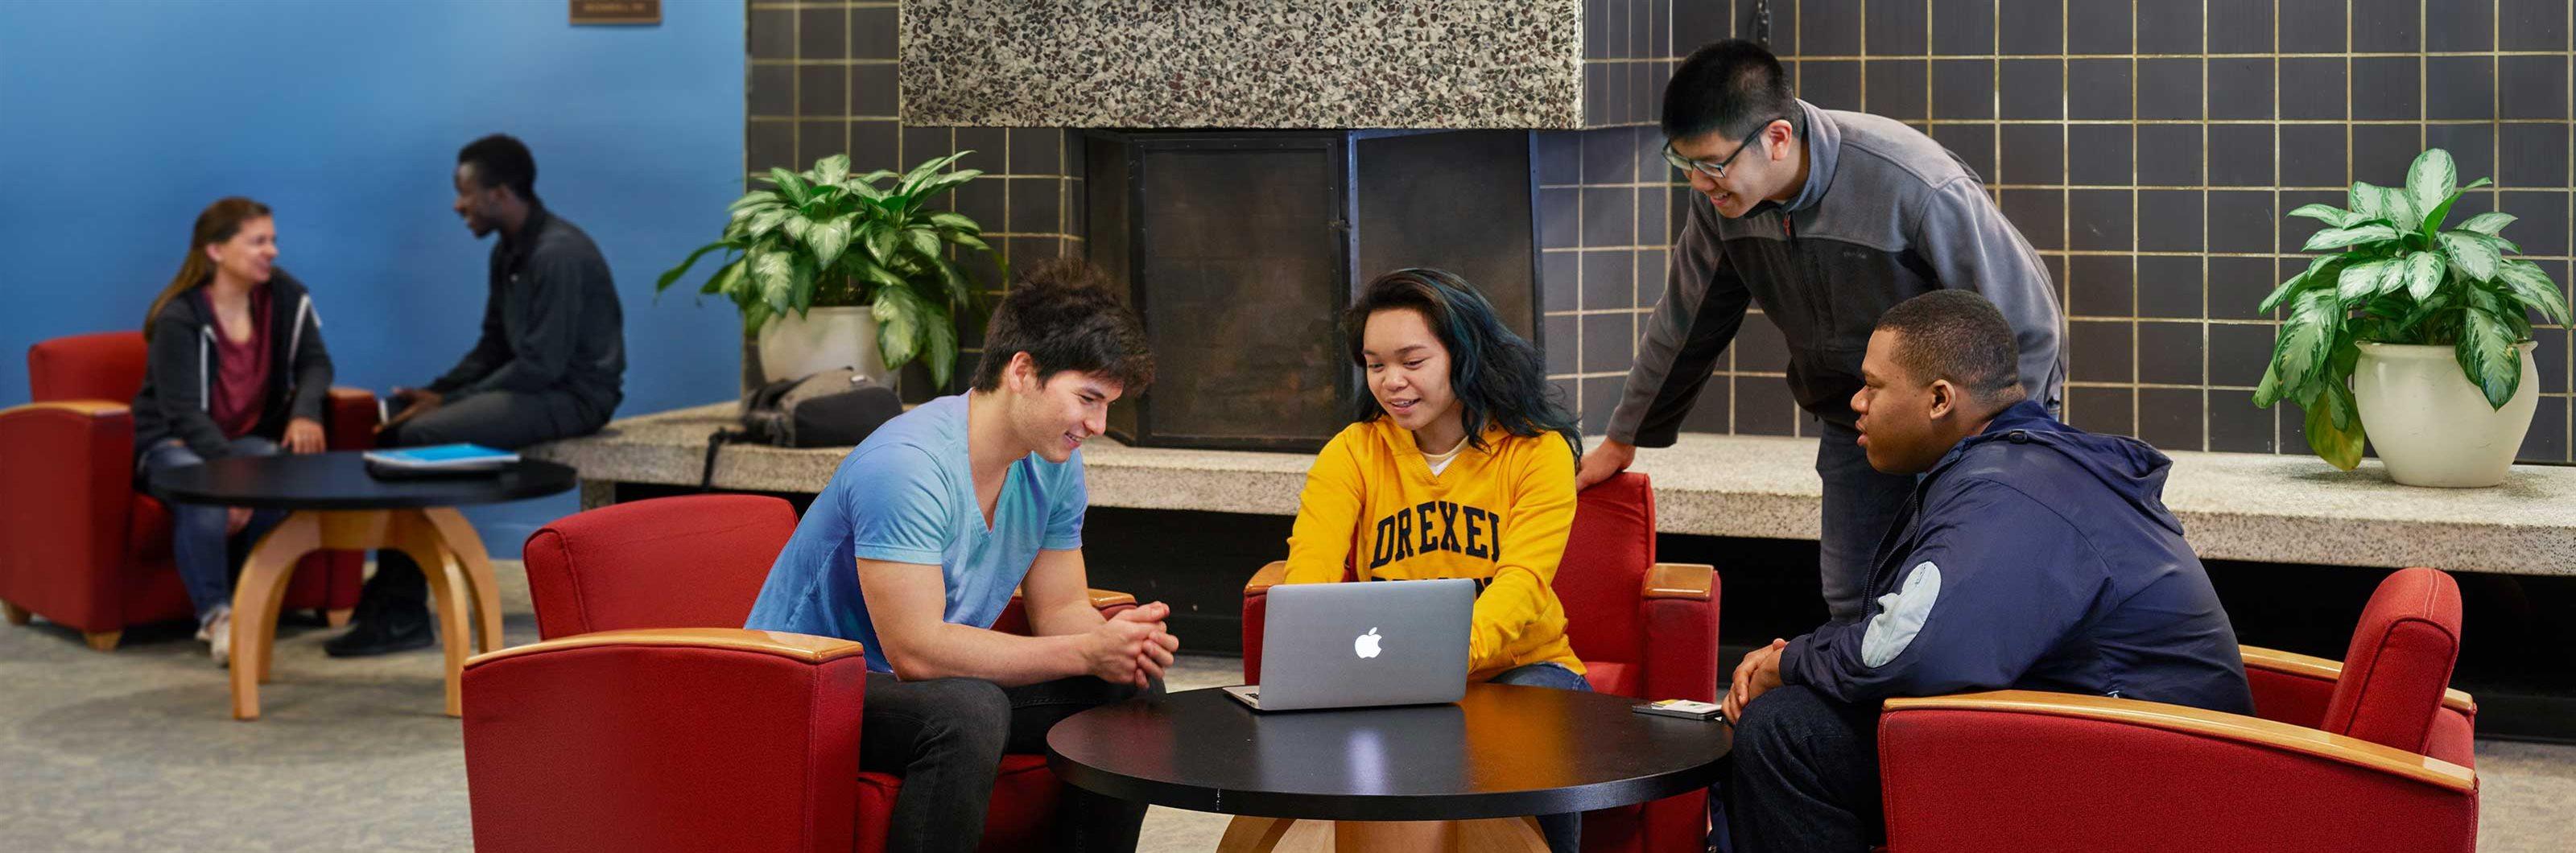 Drexel students socialize around a computer